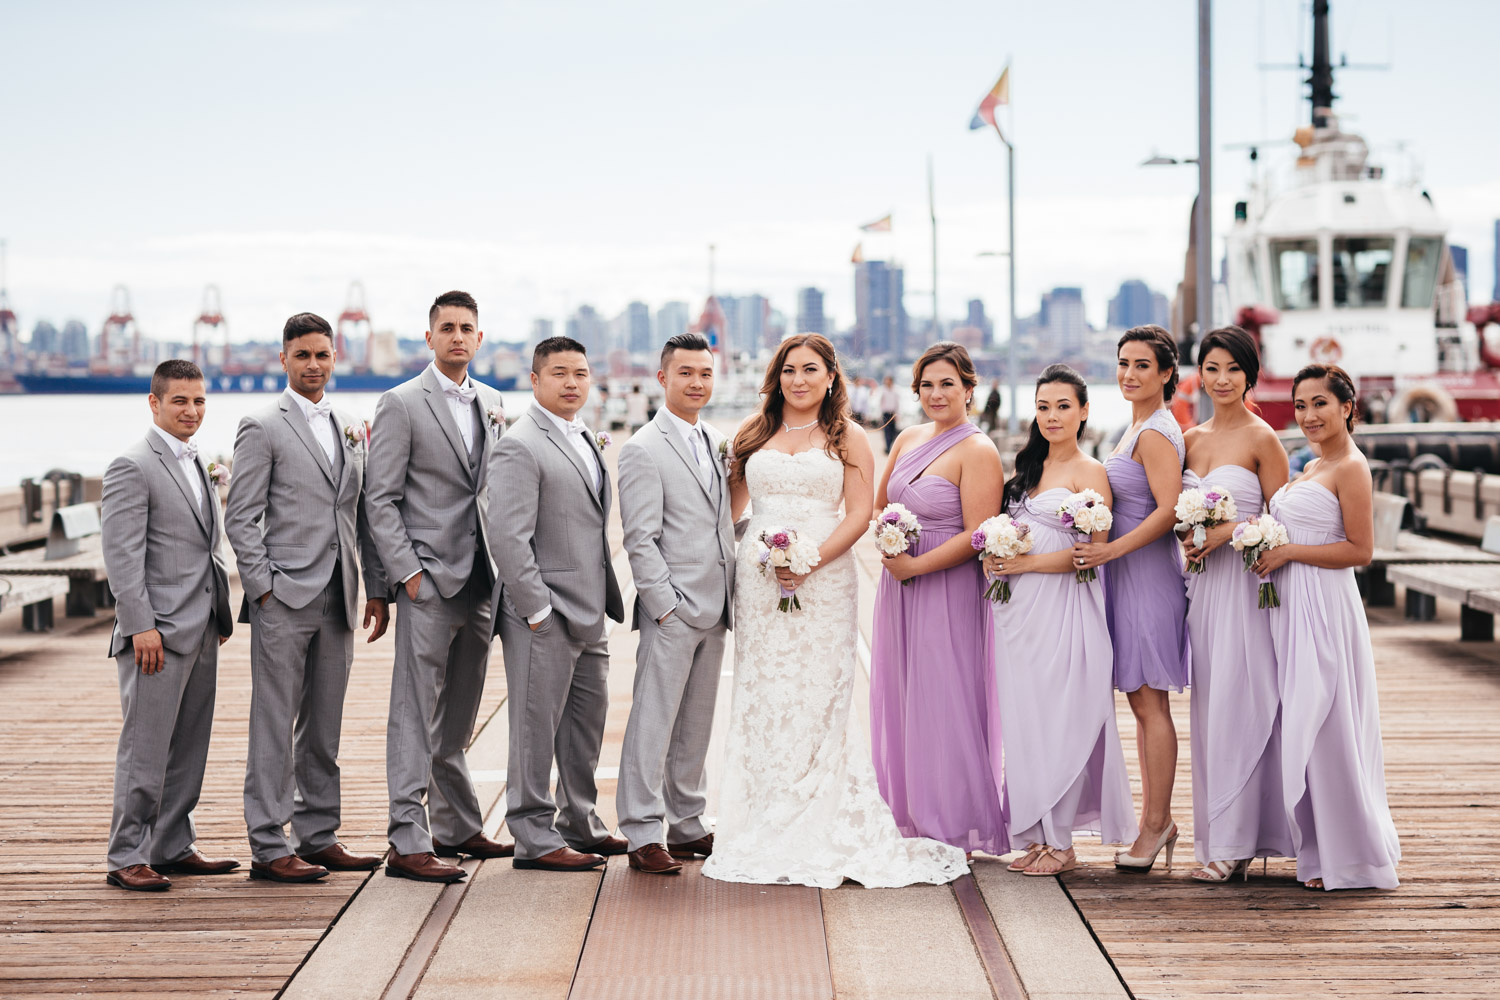 Burrard Dry Dock wedding photography portraits bridal party in North Vancouver BC